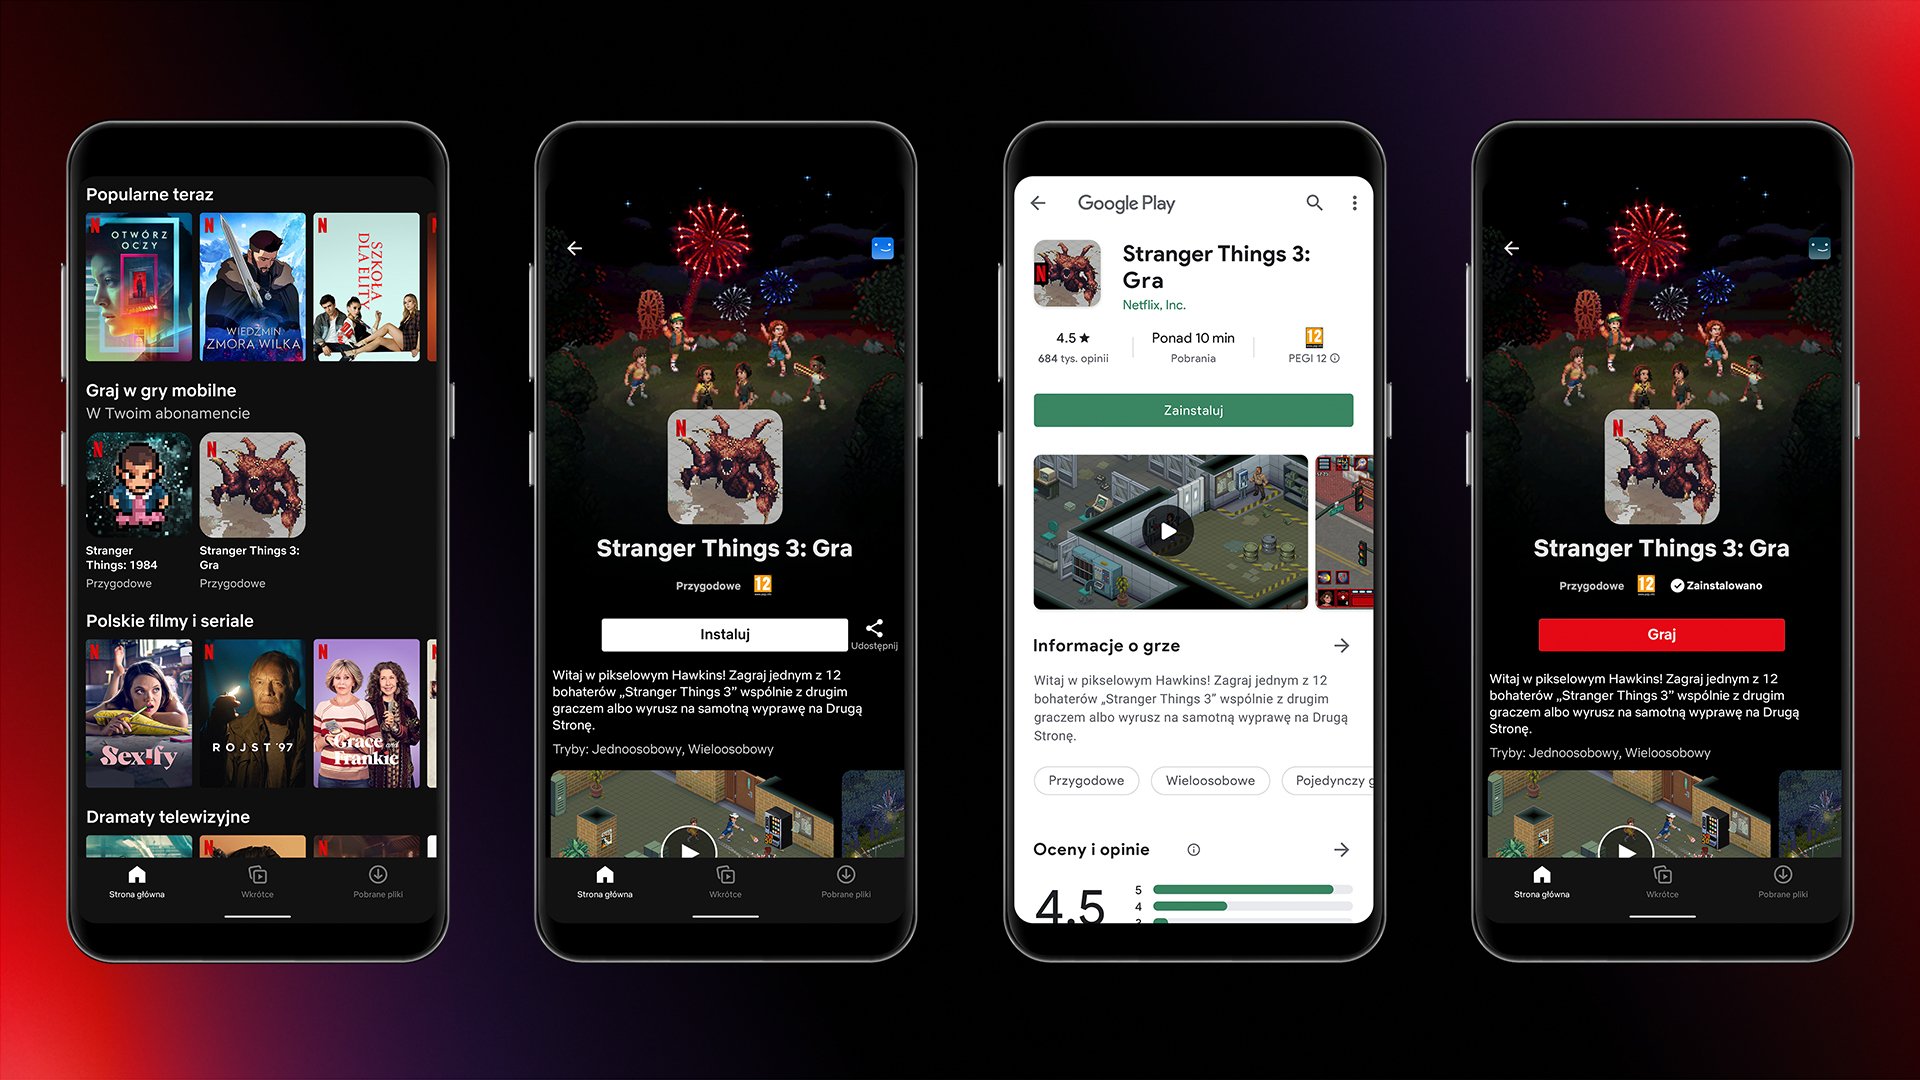 Netflix has launched a mobile games section, with two games based on the series "Stranger Things" available so far